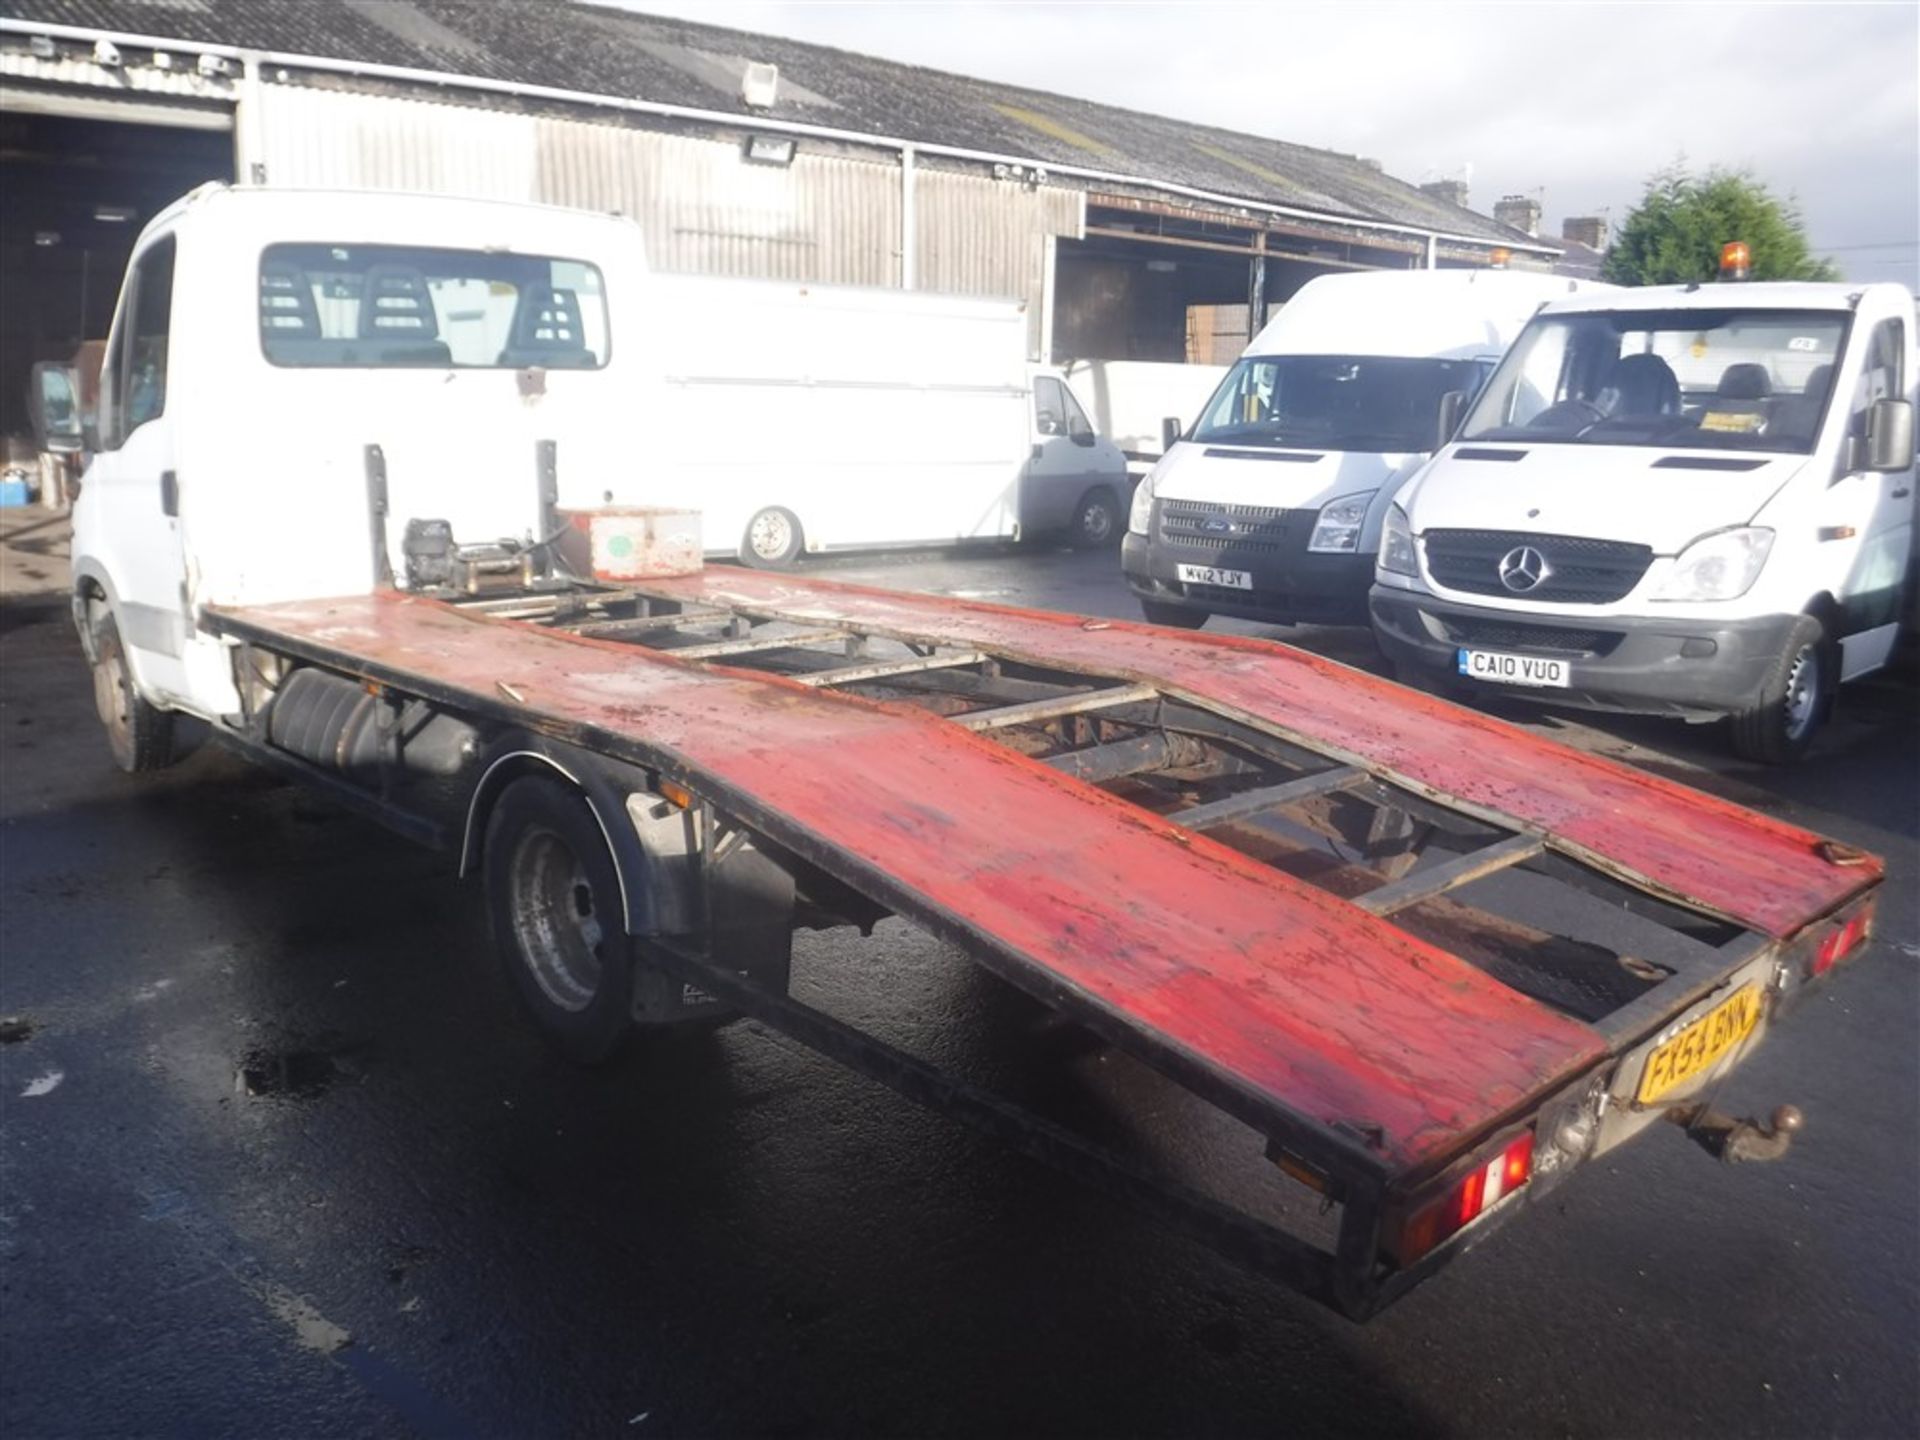 54 reg IVECO 45C15 RECOVERY TRUCK, 1ST REG 10/04, 512965KM, V5 HERE, 2 FORMER KEEPERS [NO VAT] - Image 3 of 5